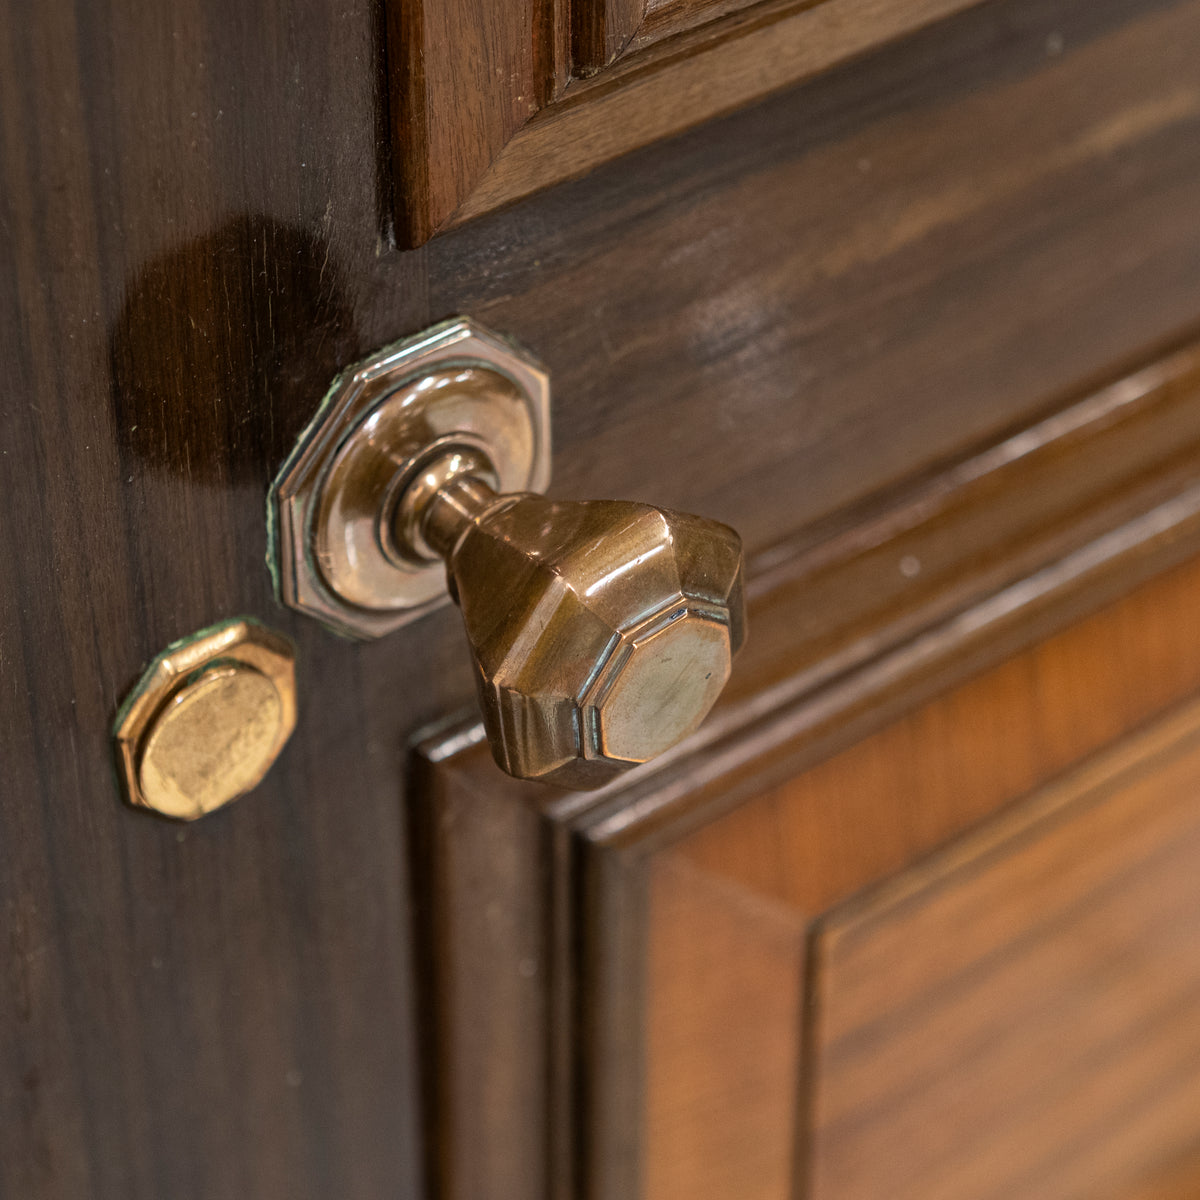 Walnut Cloakroom Doors Reclaimed From Clothworkers&#39; Hall | The Architectural Forum